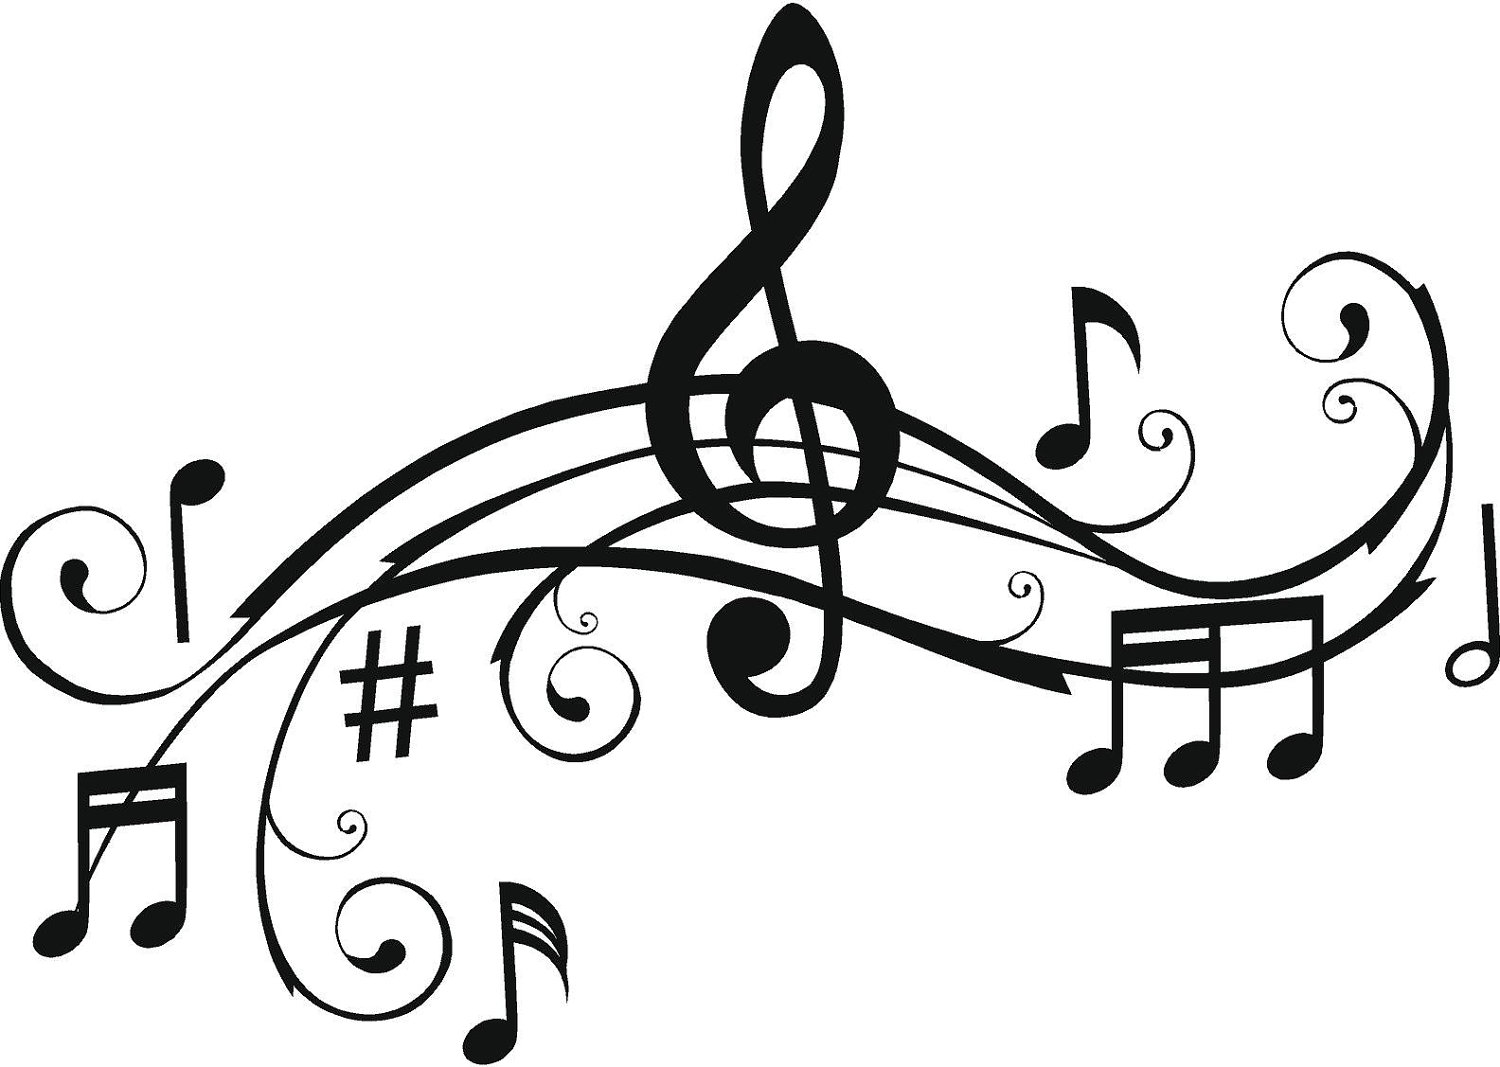 Free Printable Music Note Coloring Pages For Kids | Free Coloring ...